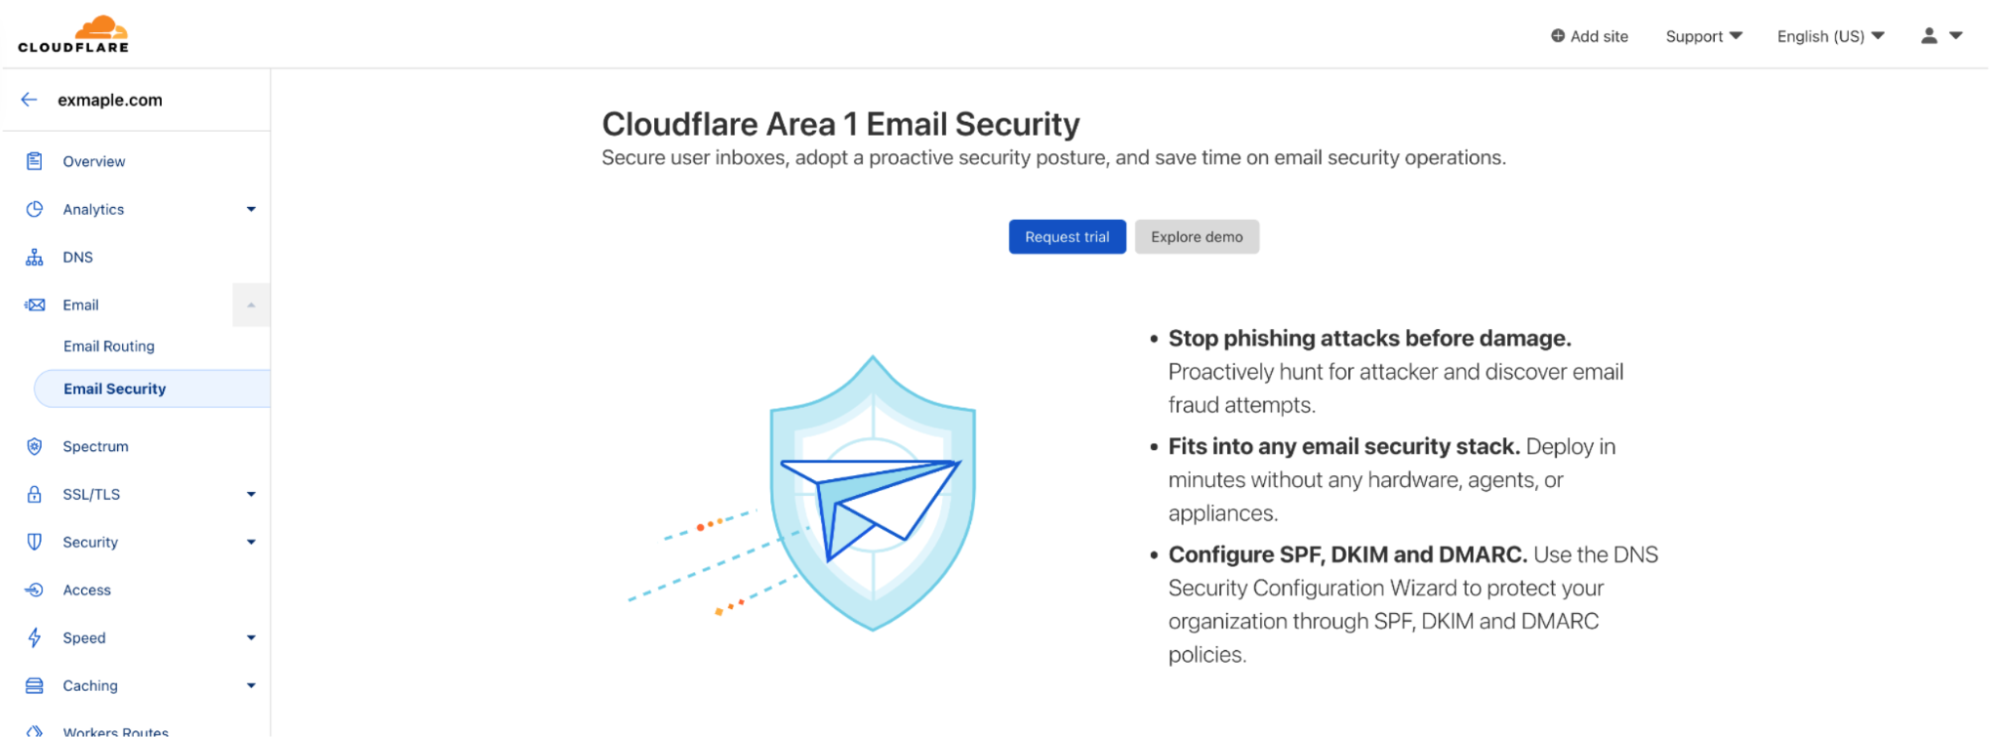 Email Security page in the Cloudflare Dashboard